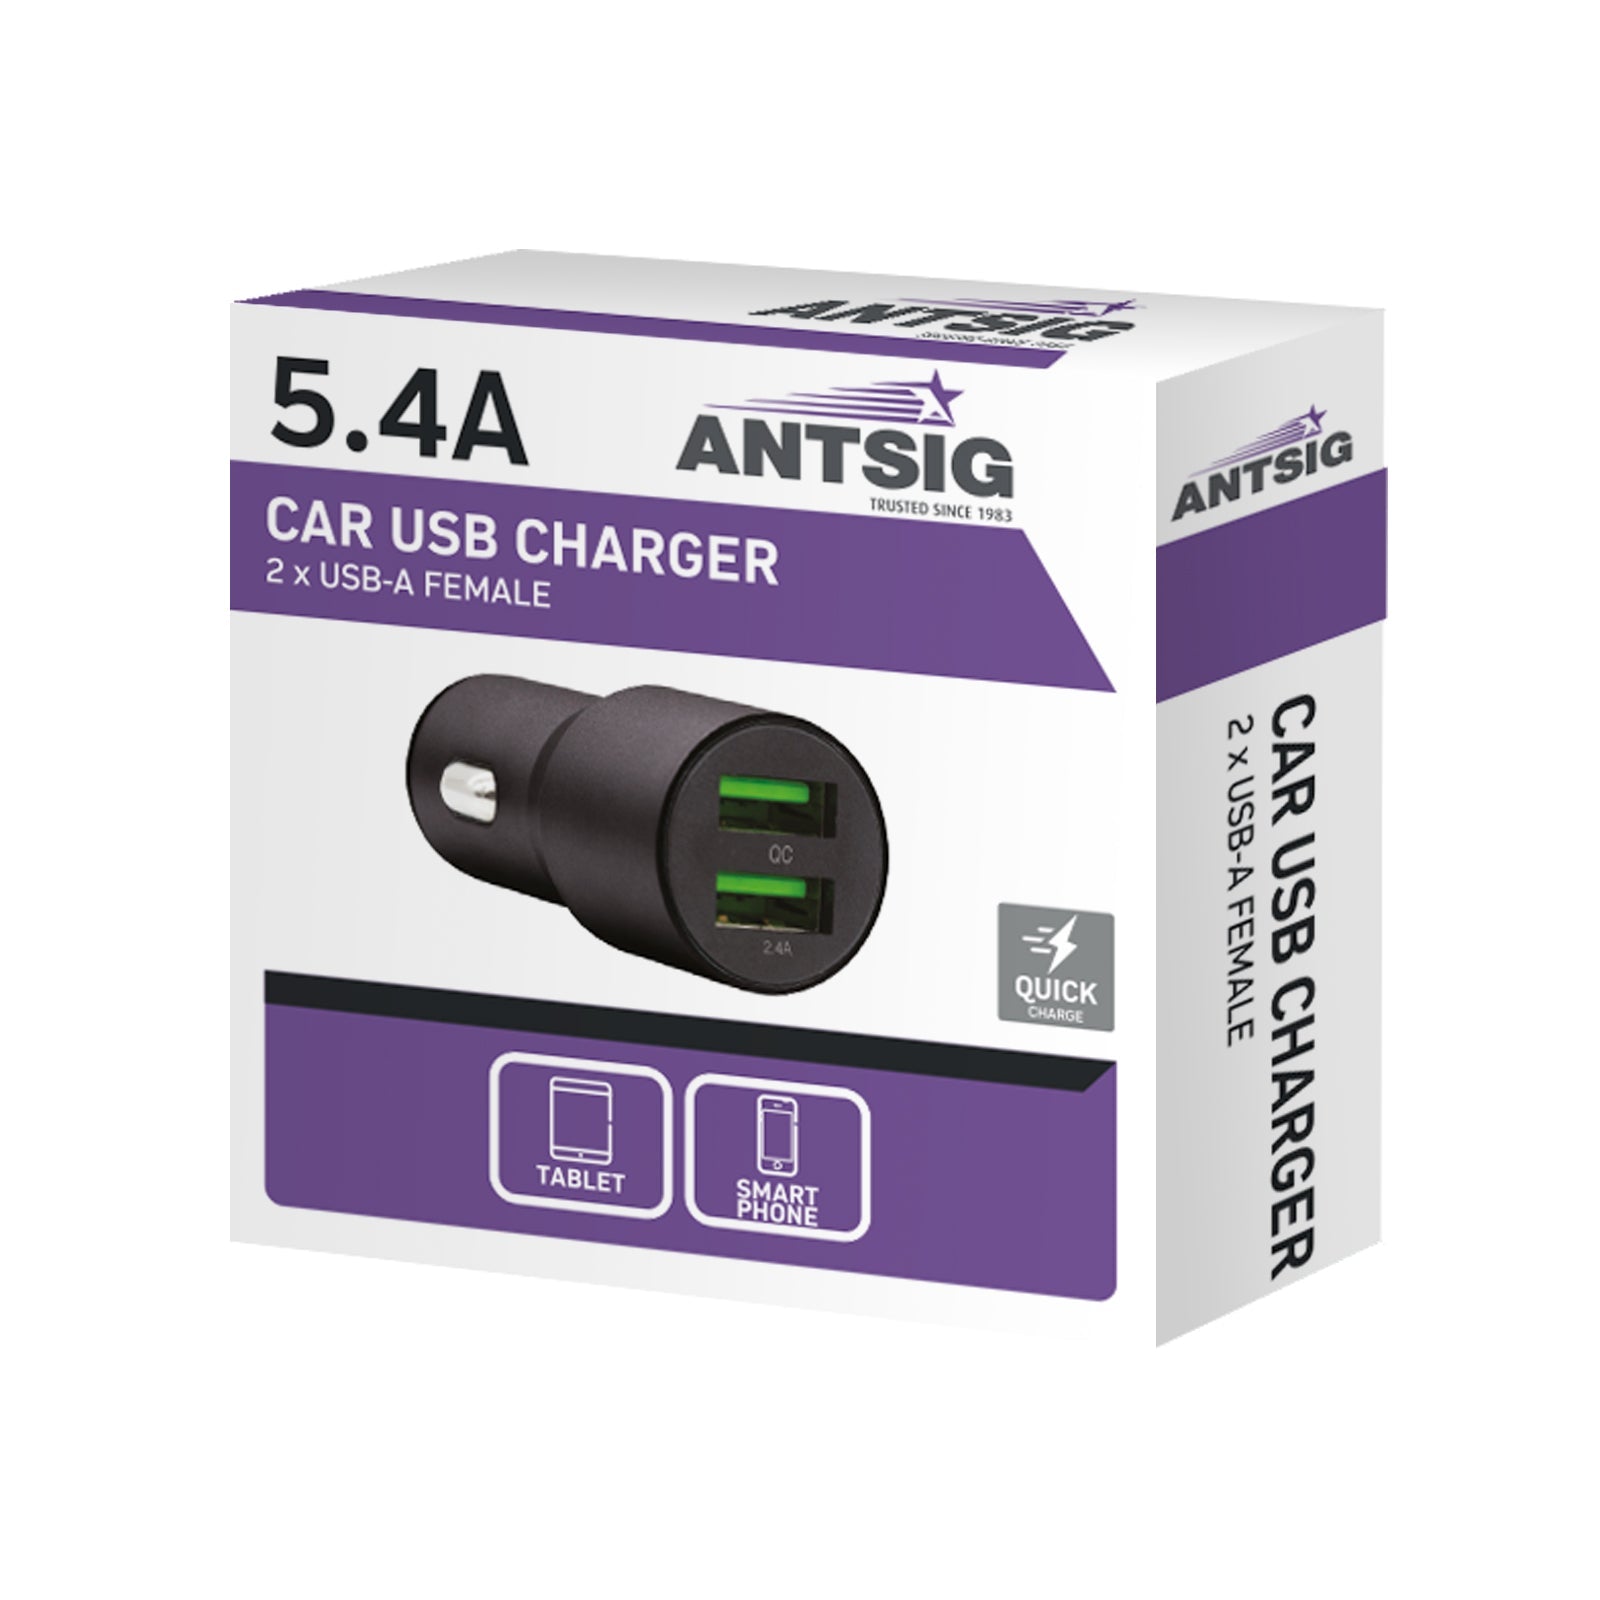 Car Charger With Quick Charge